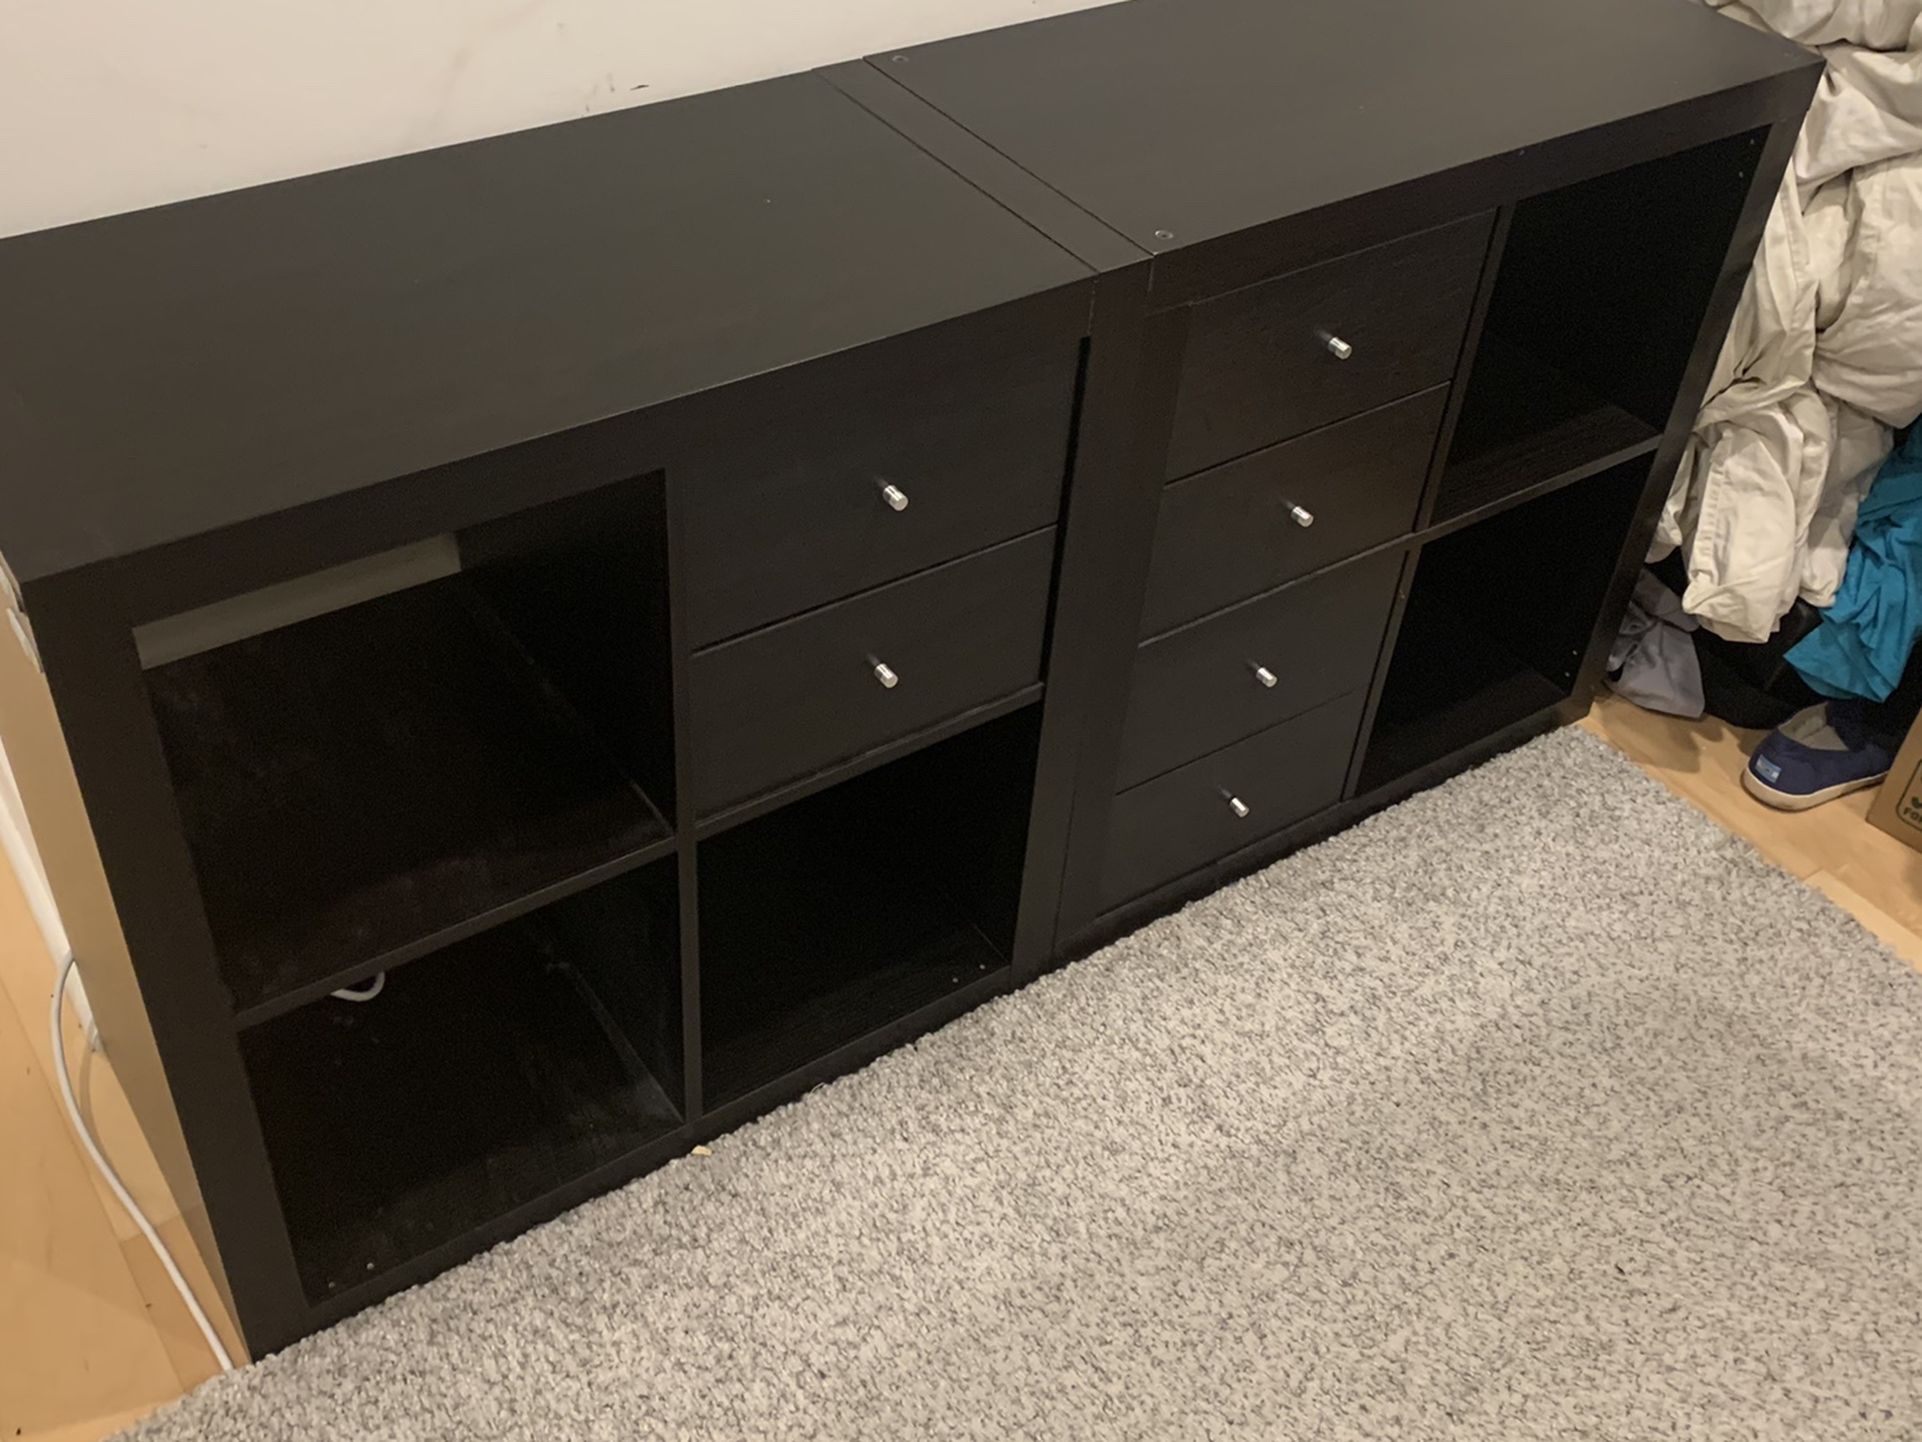 (2) 2x2 Cube Storage, Each With Drawers As Shown